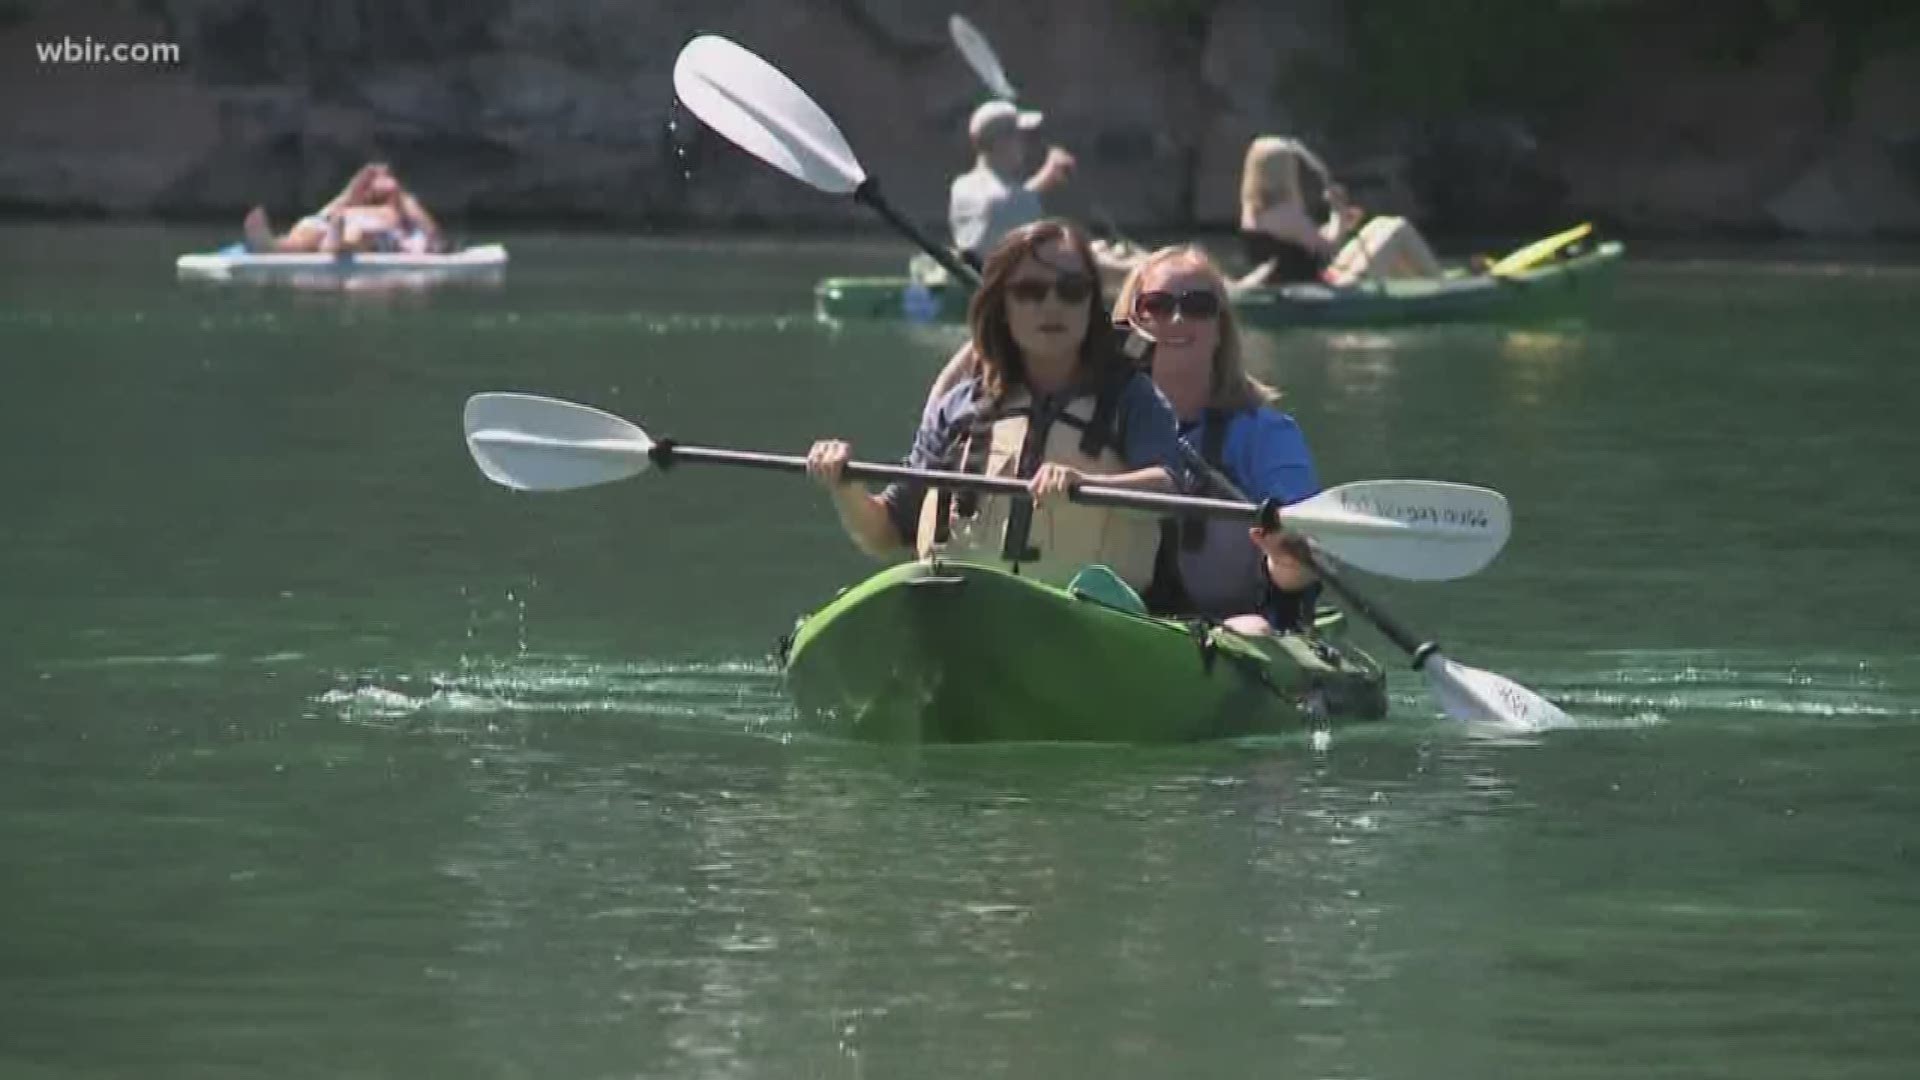 Ijams Nature Center is a hub of activities for kids, families, and adults during the summer.  At Mead's Quarry Lake -- canoe, kayak, and paddleboard rentals are offered daily during the summer months. 
The extended summer hours begin Memorial Day.